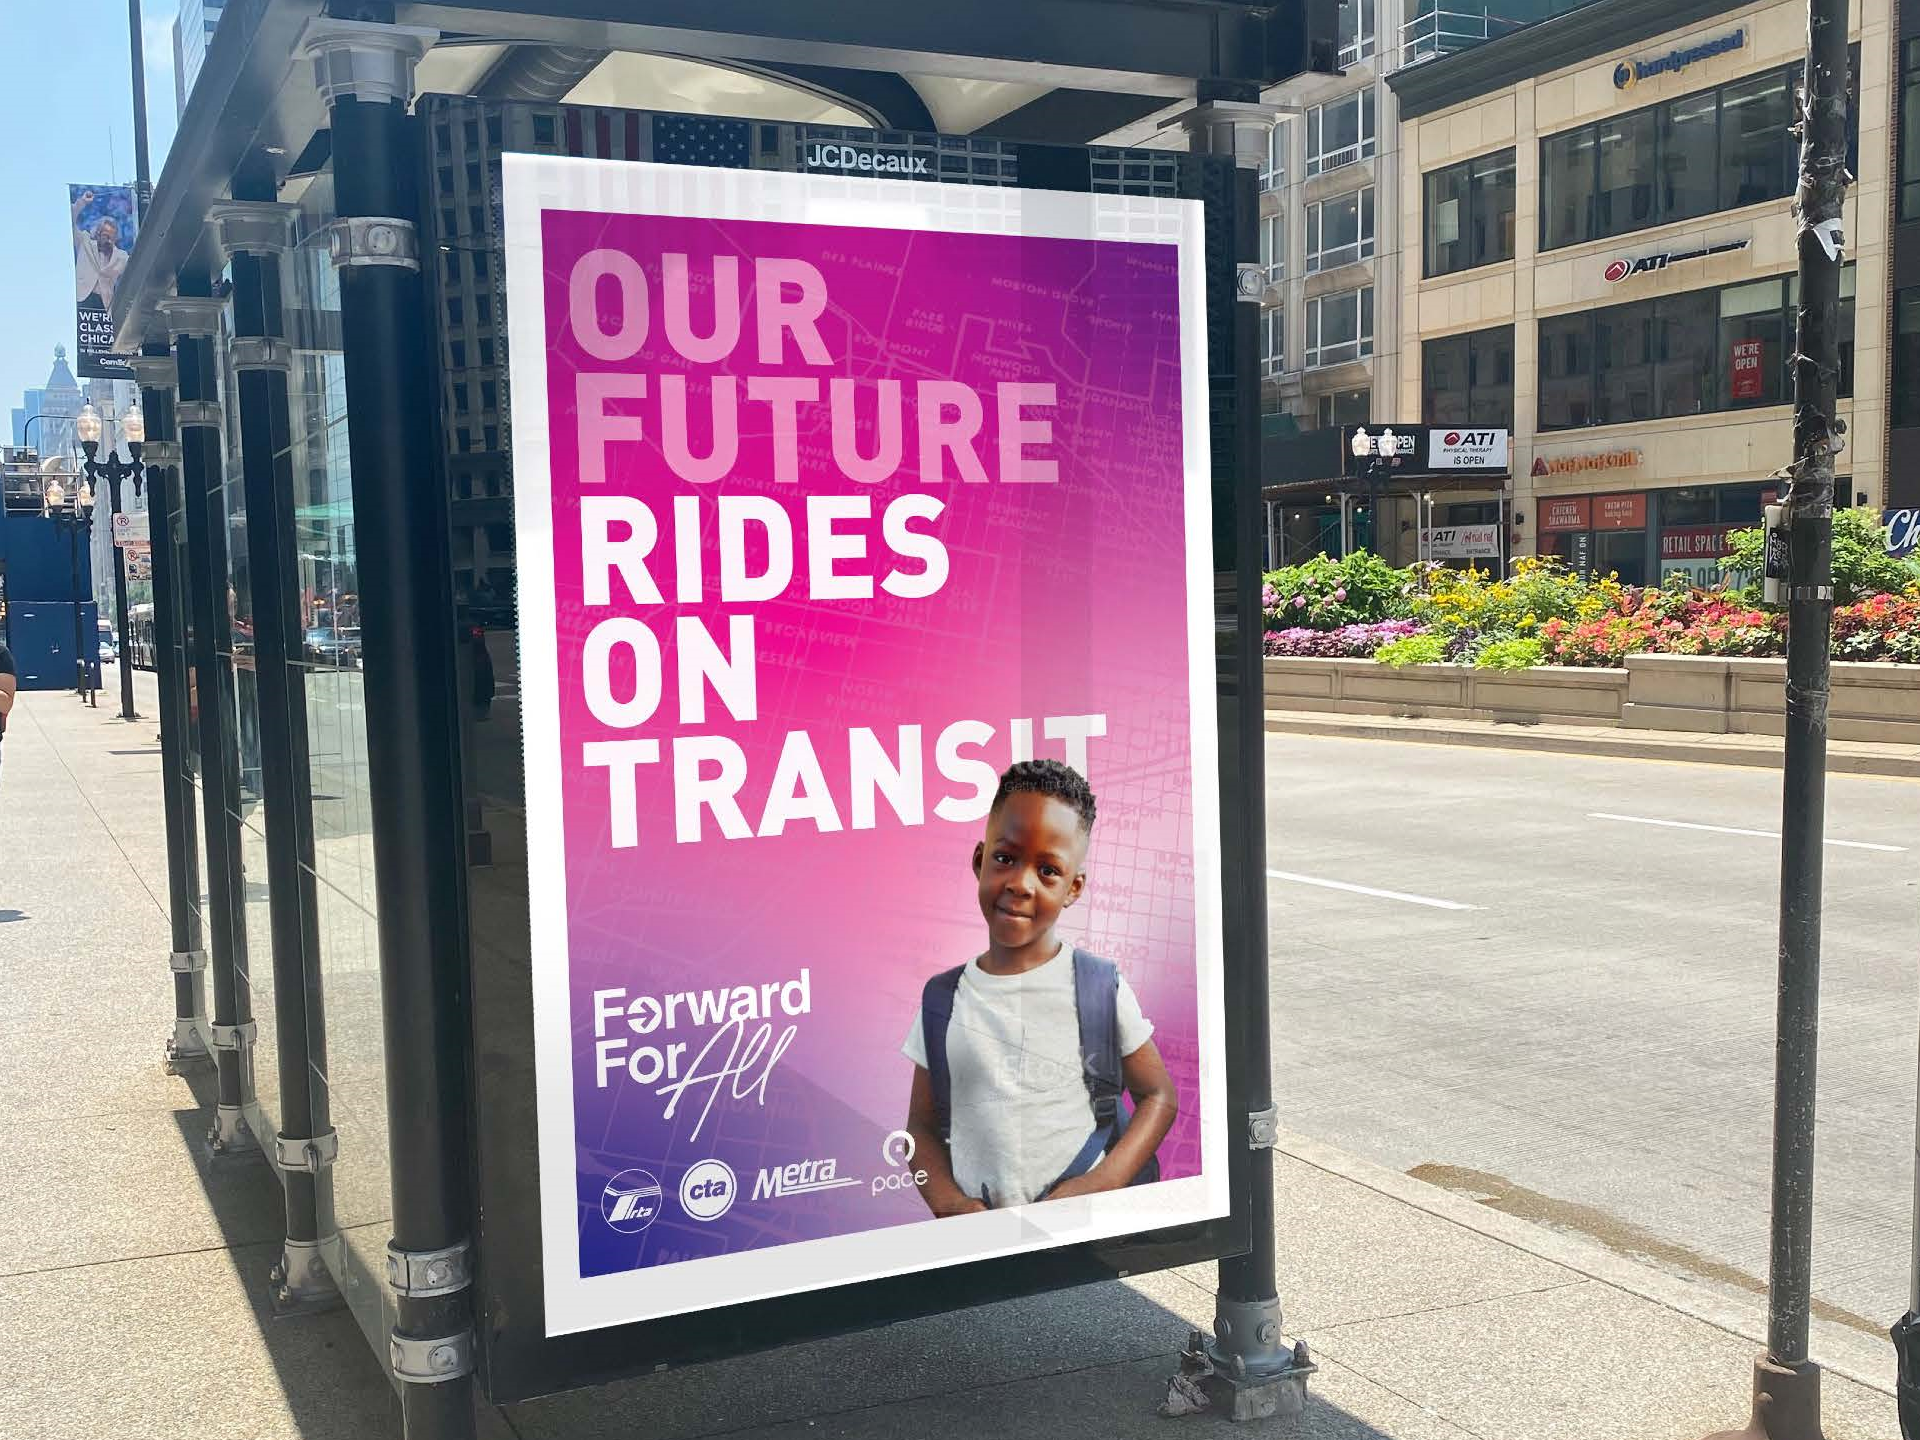 Bus shelter ad for Forward For All campaign that says "Our Future Rides on Transit"